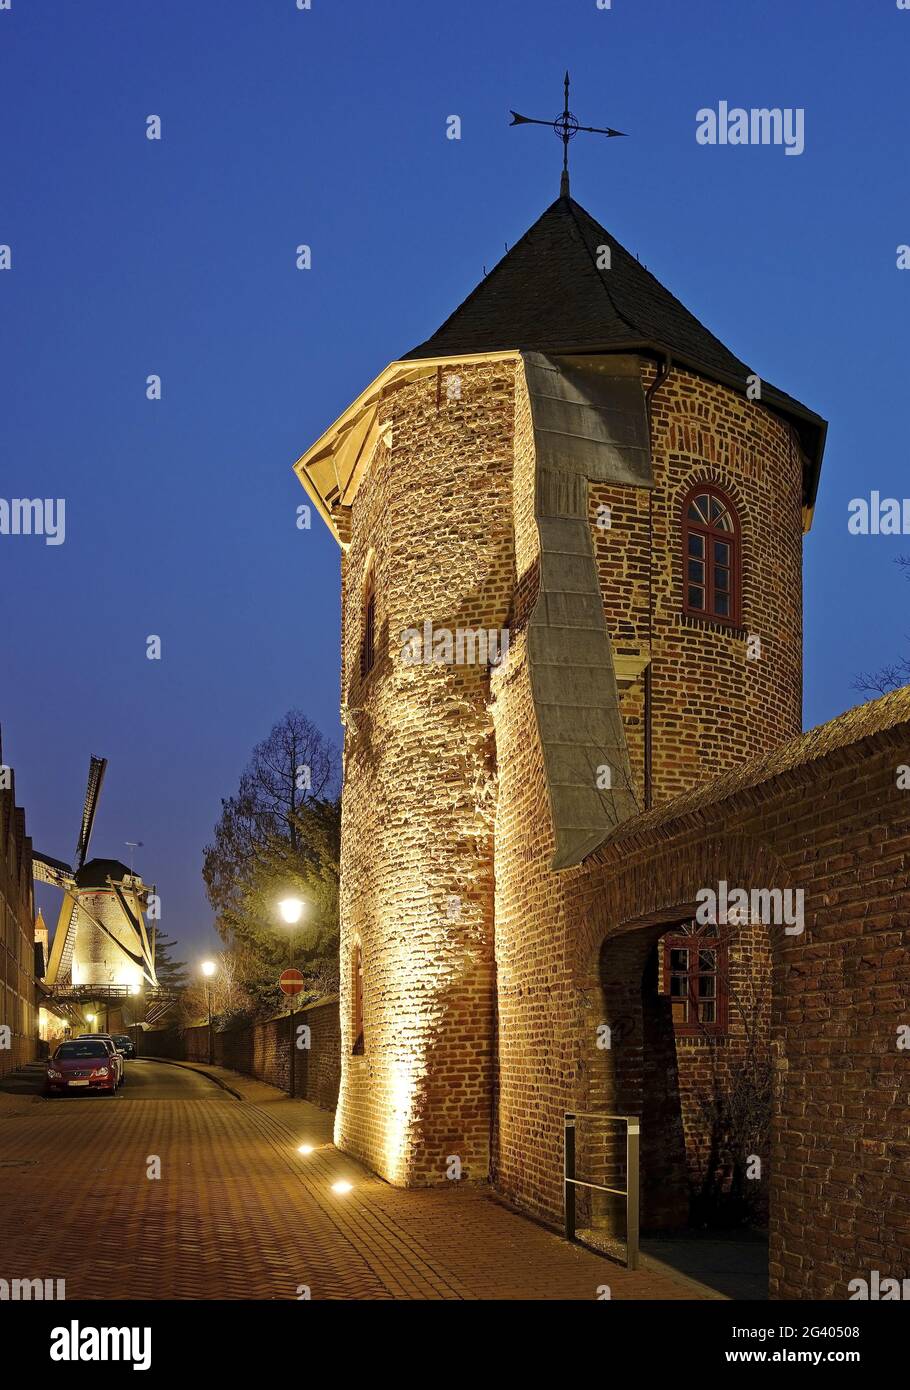 City wall with Kriemhild mill in the evening, Xanten, North Rhine-Westphalia, Germany, Europe Stock Photo